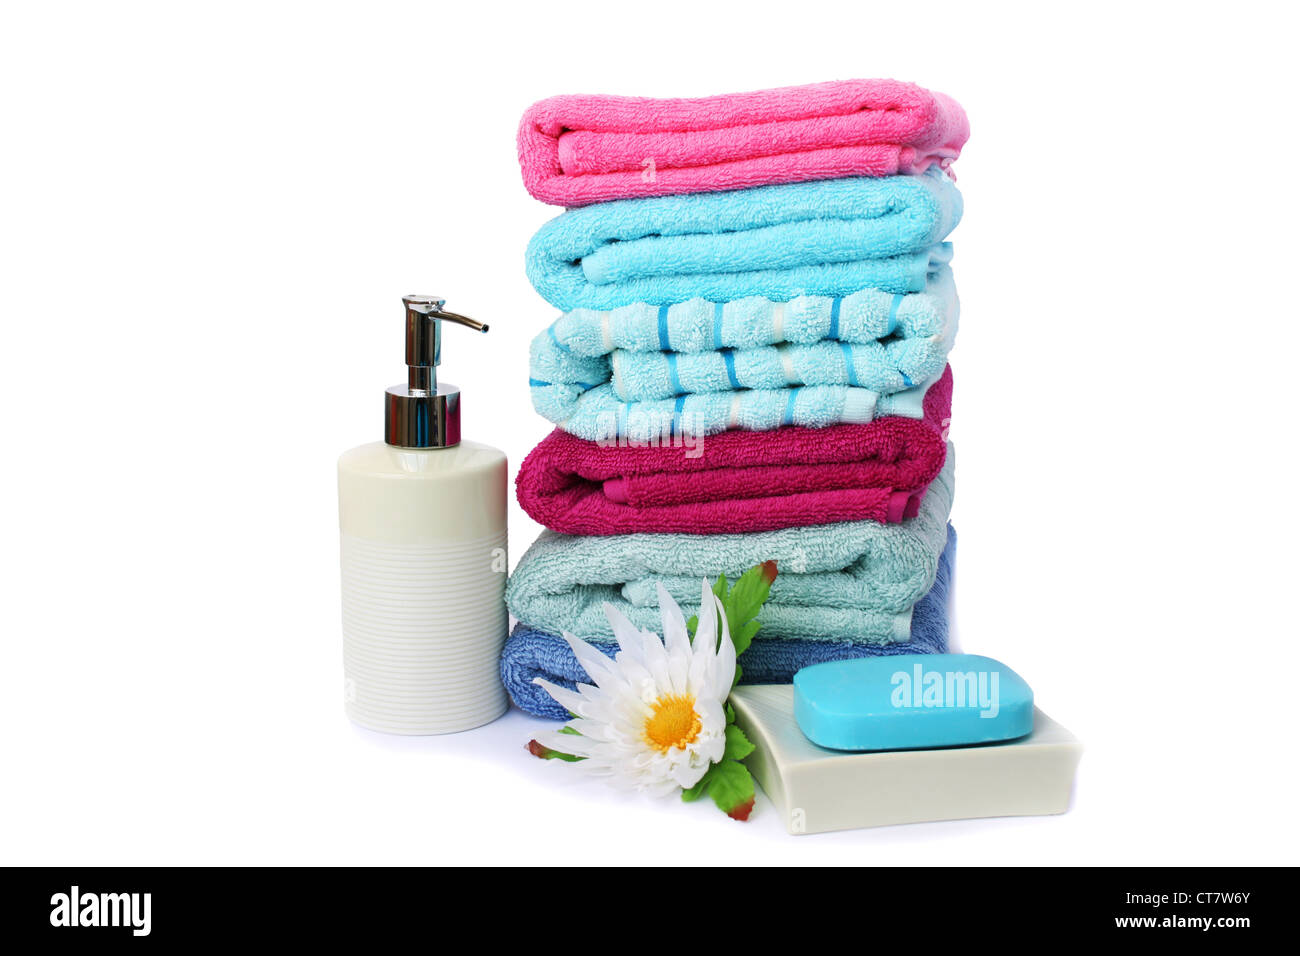 Stack of towels, soaps and flowers isolated on white background. Stock Photo